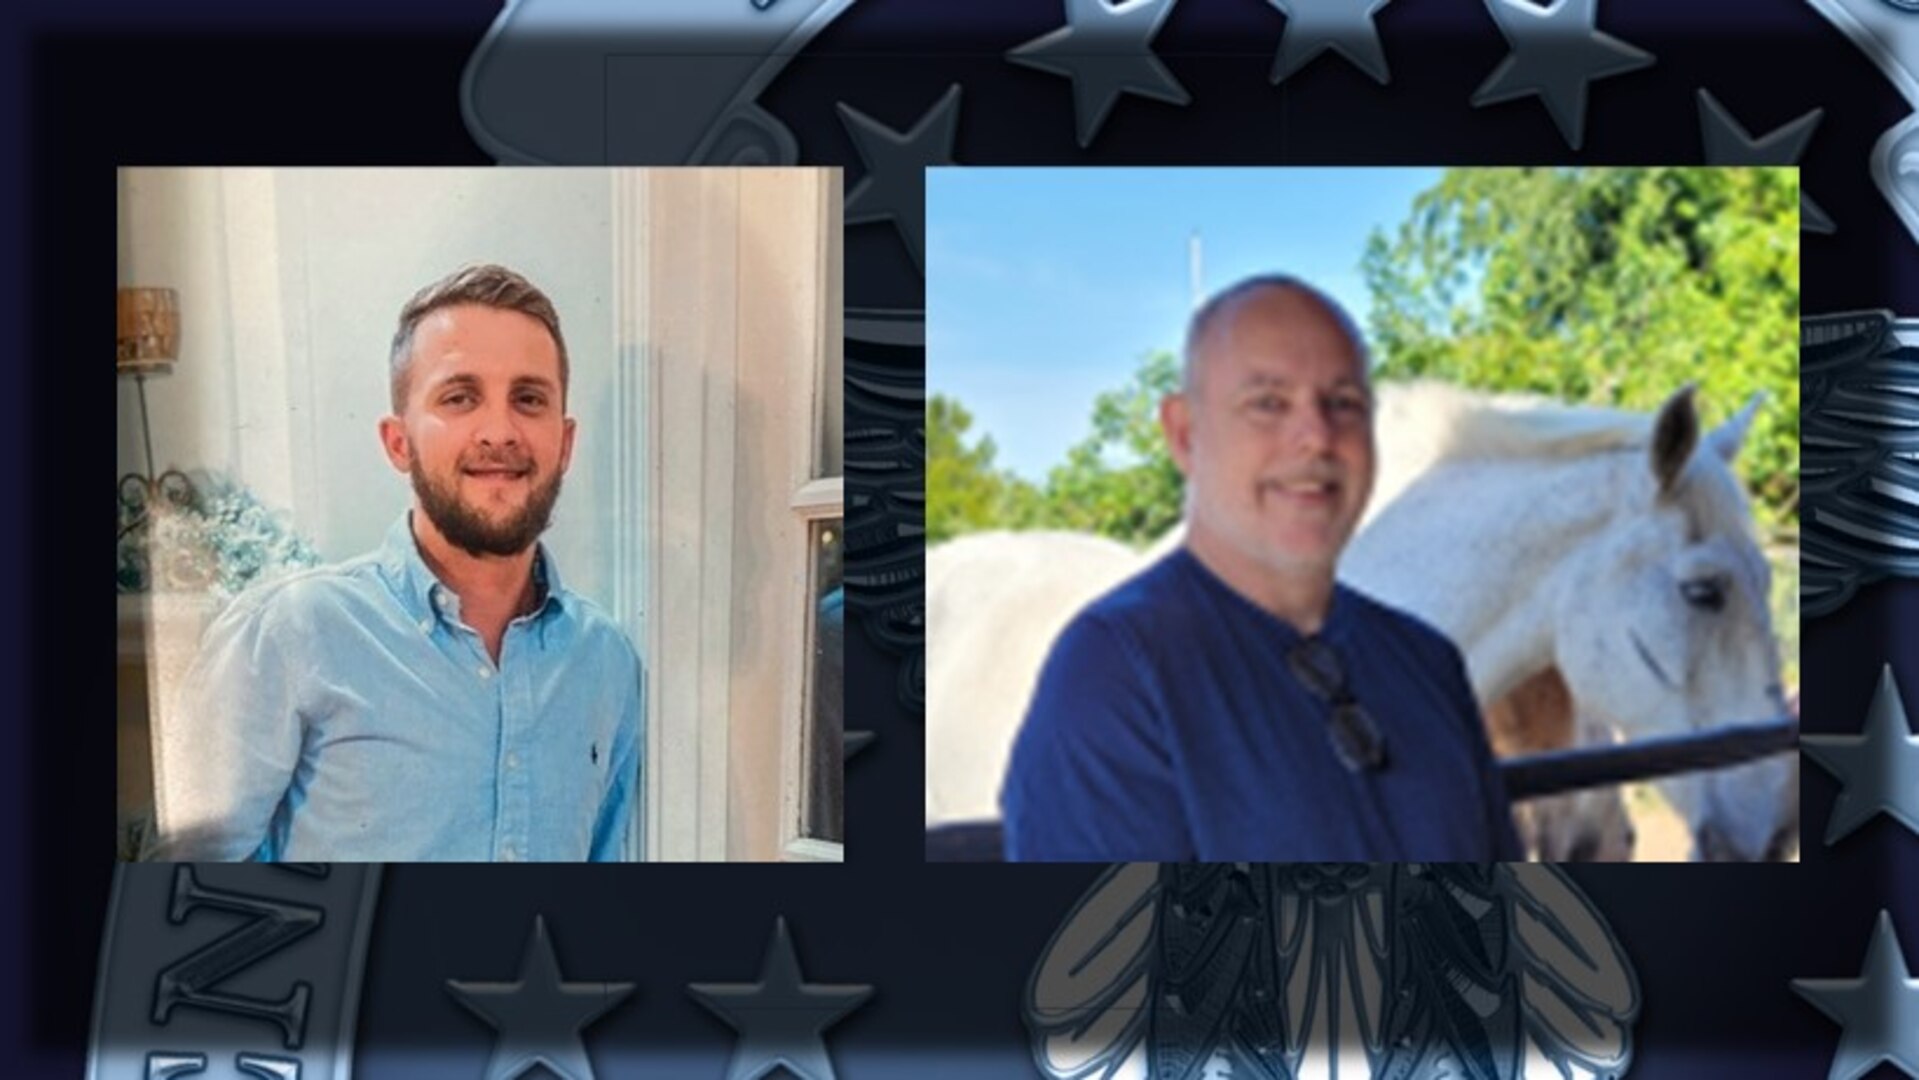 March EOM Winners Are Dedicated to Supporting Warfighters